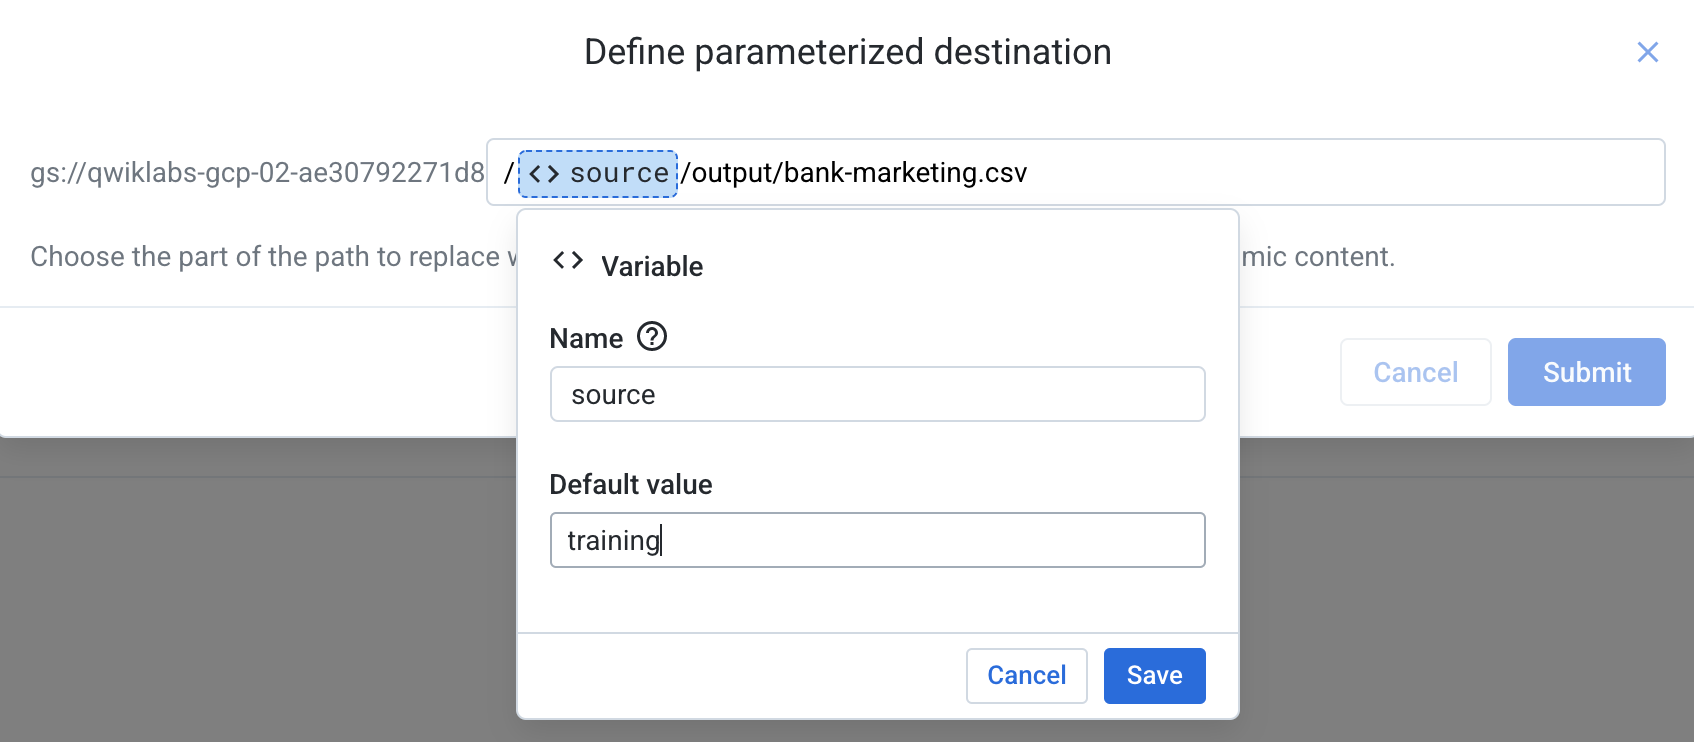 Define parameterized destination page with sourcce name and default value highlighted